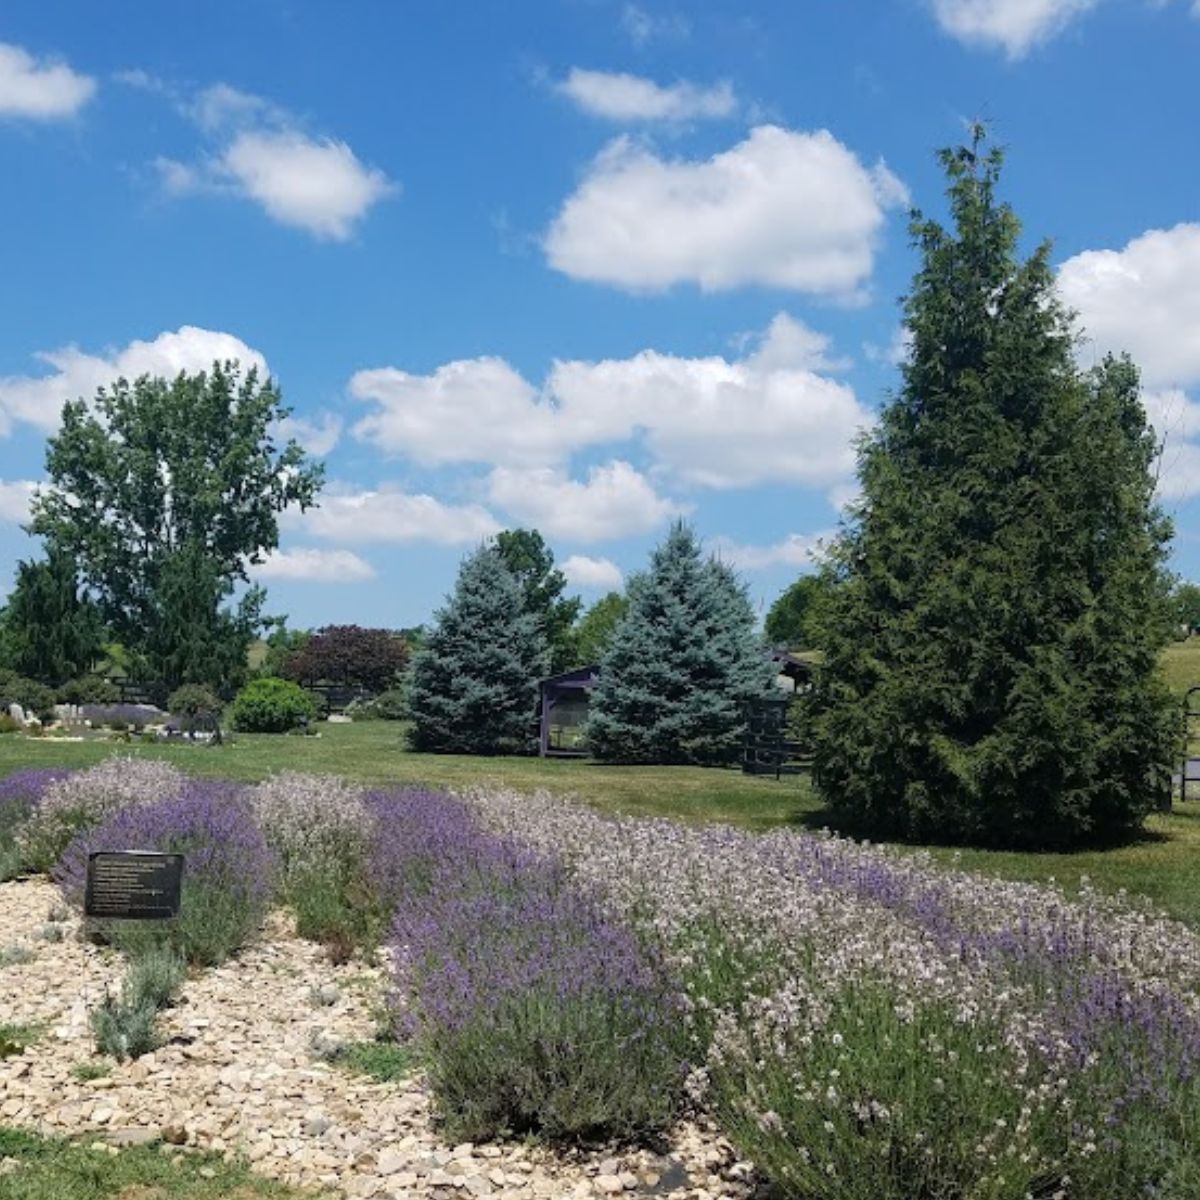 A field of lavender with evergreen trees in the background and a beautiful blue sky and white clouds. 